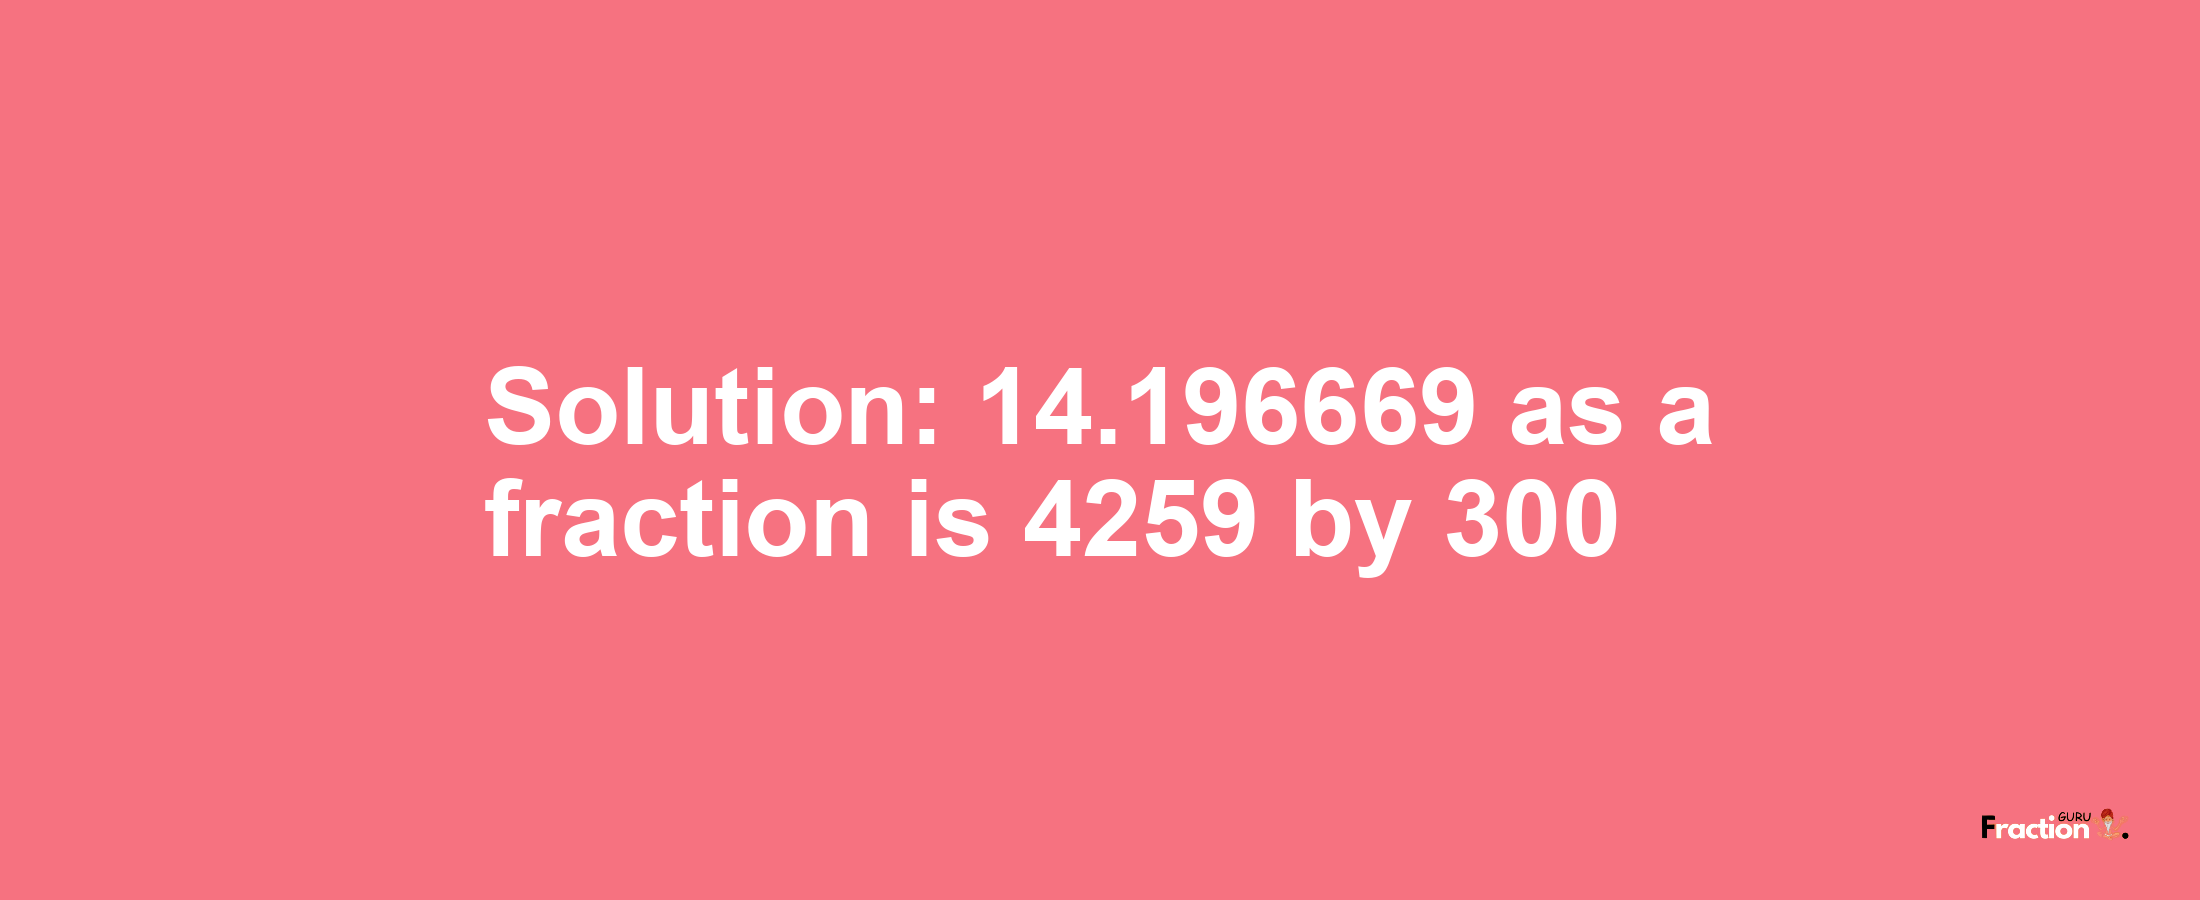 Solution:14.196669 as a fraction is 4259/300